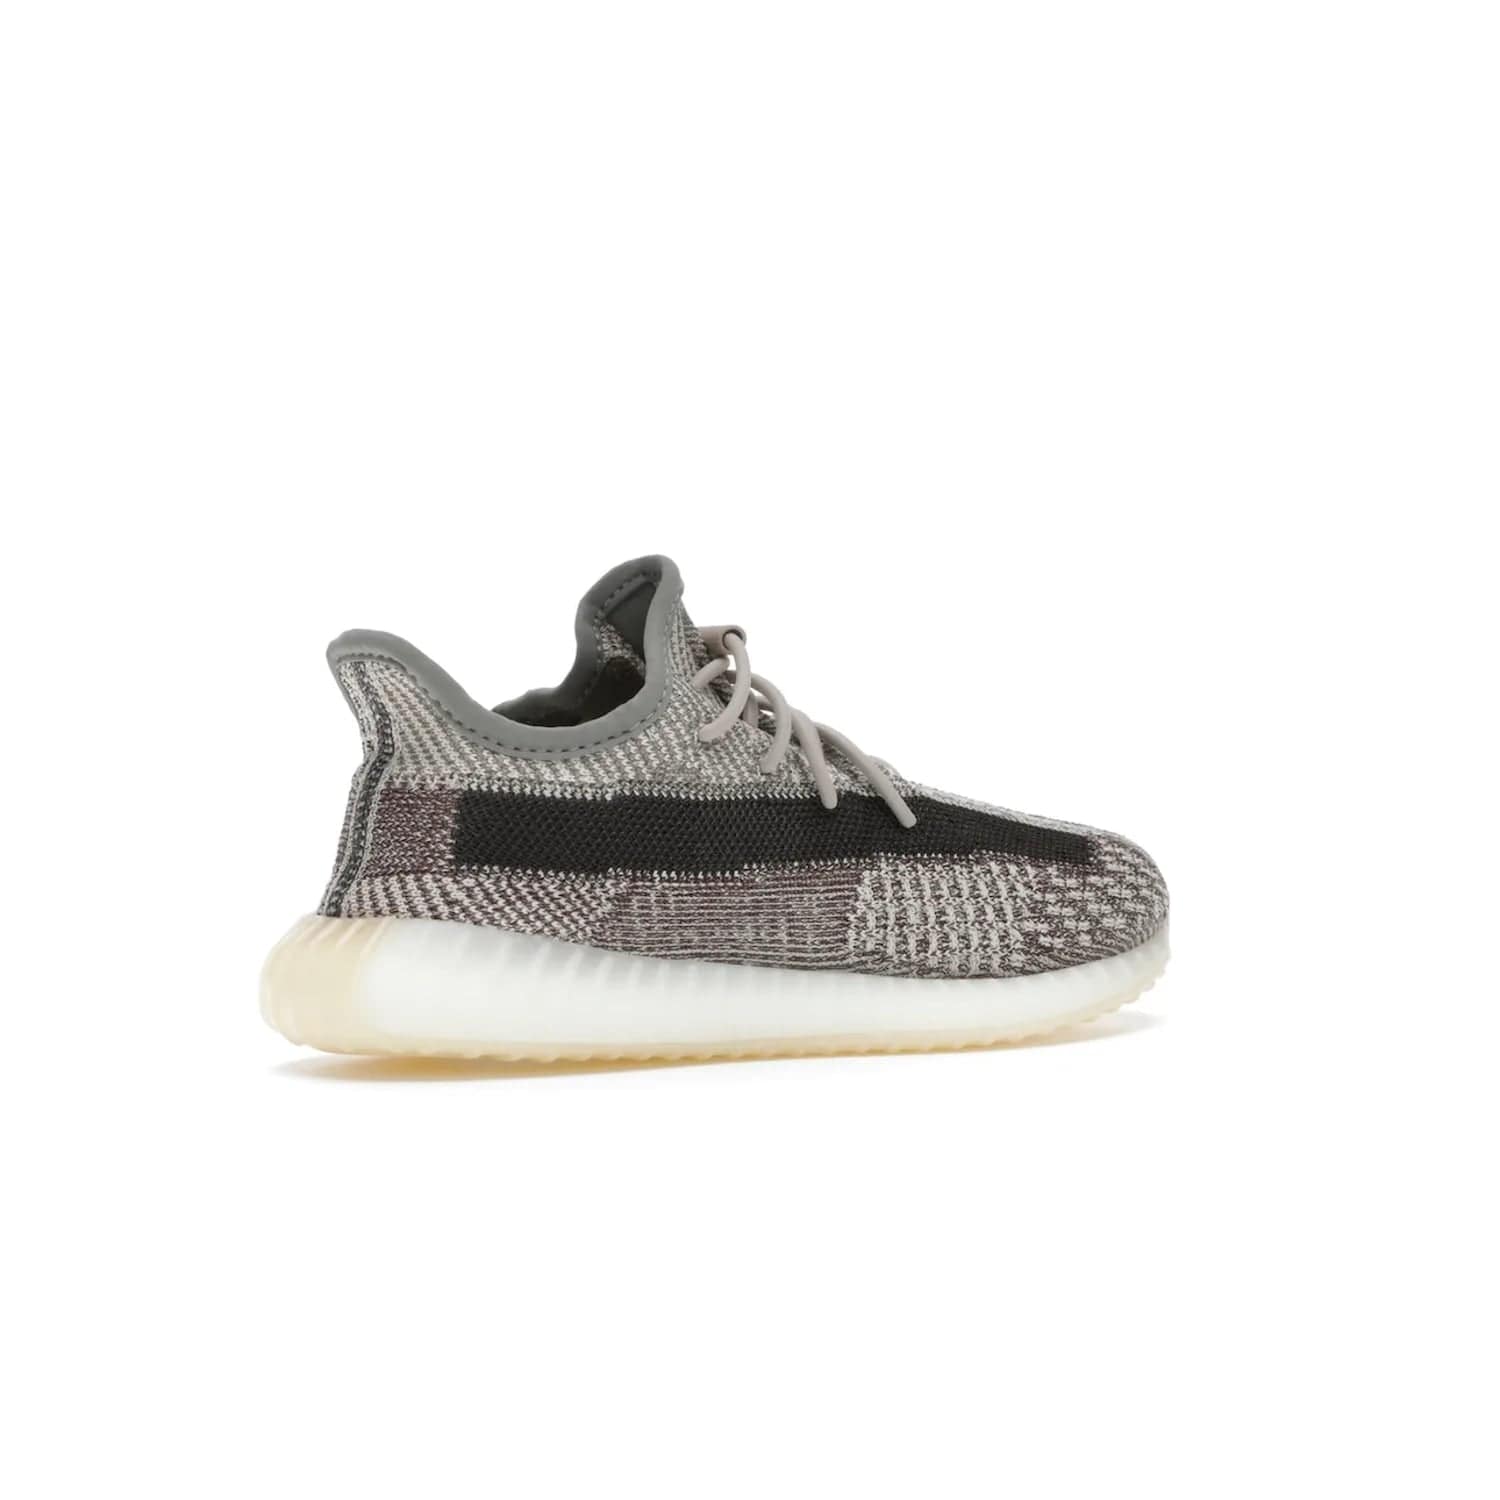 adidas Yeezy Boost 350 V2 Zyon (Kids) - Image 34 - Only at www.BallersClubKickz.com - The adidas Yeezy Boost 350 V2 Zyon (Kids) - perfect pick for fashion-savvy kids. Features soft Primeknit upper, lace closure & colorful patterning. Comfort & style for kids' summer outfits!